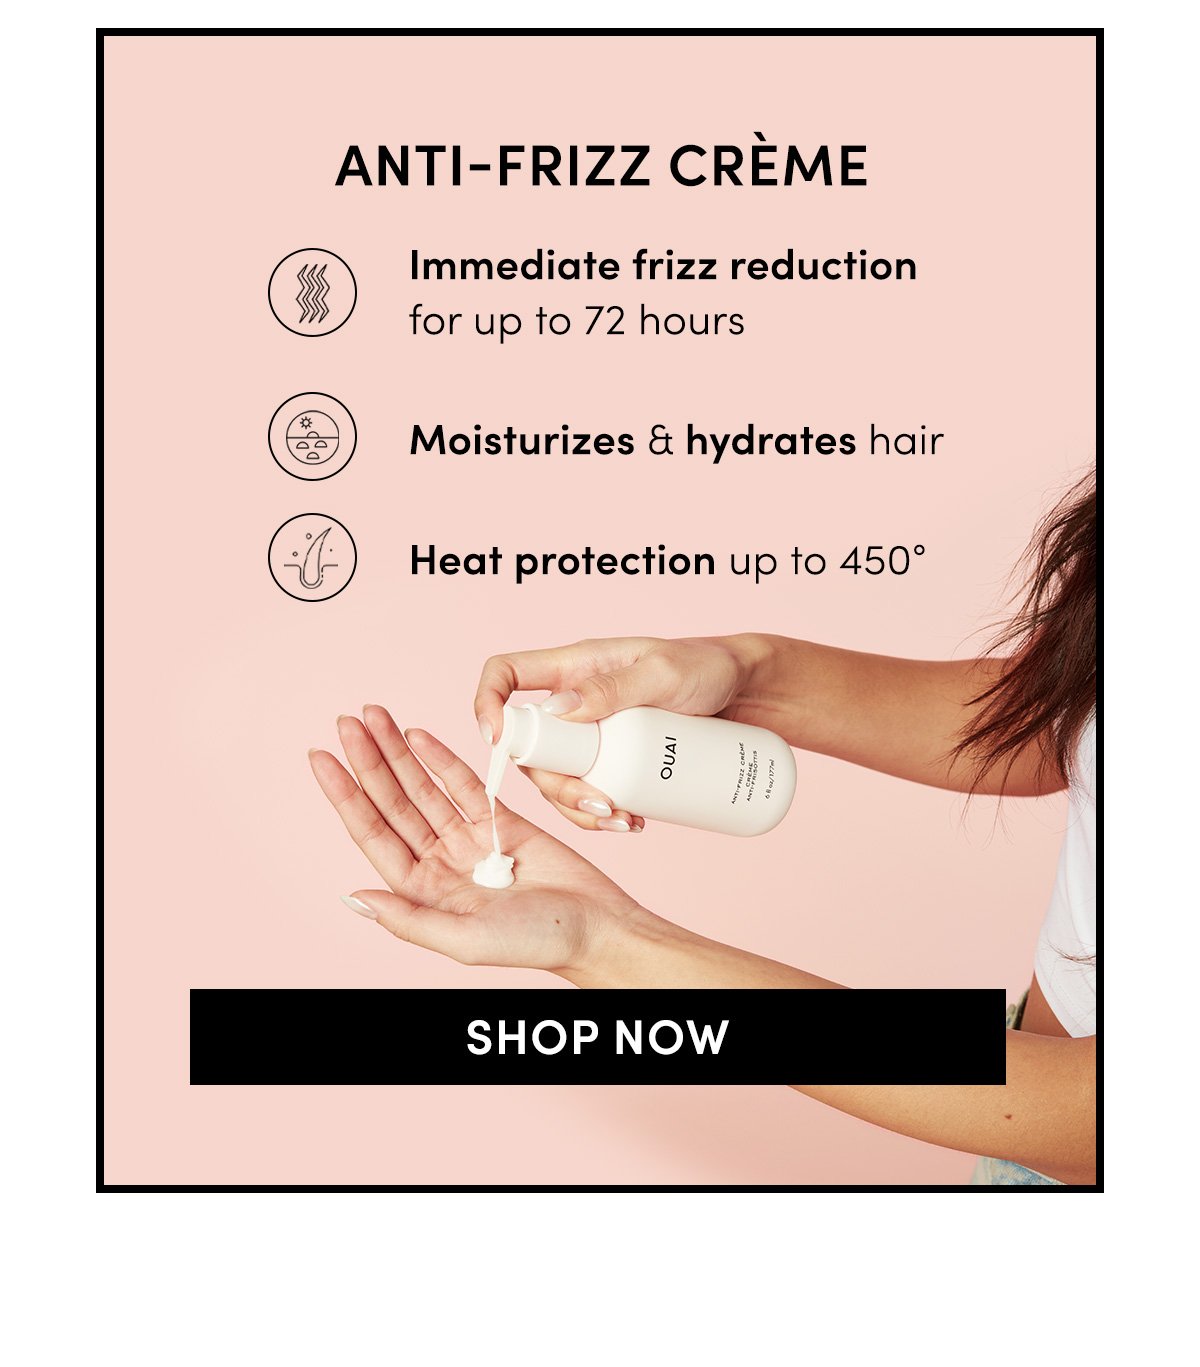 IMMEDIATE FRIZZ REDUCTION FOR UP TO 72 HOURS